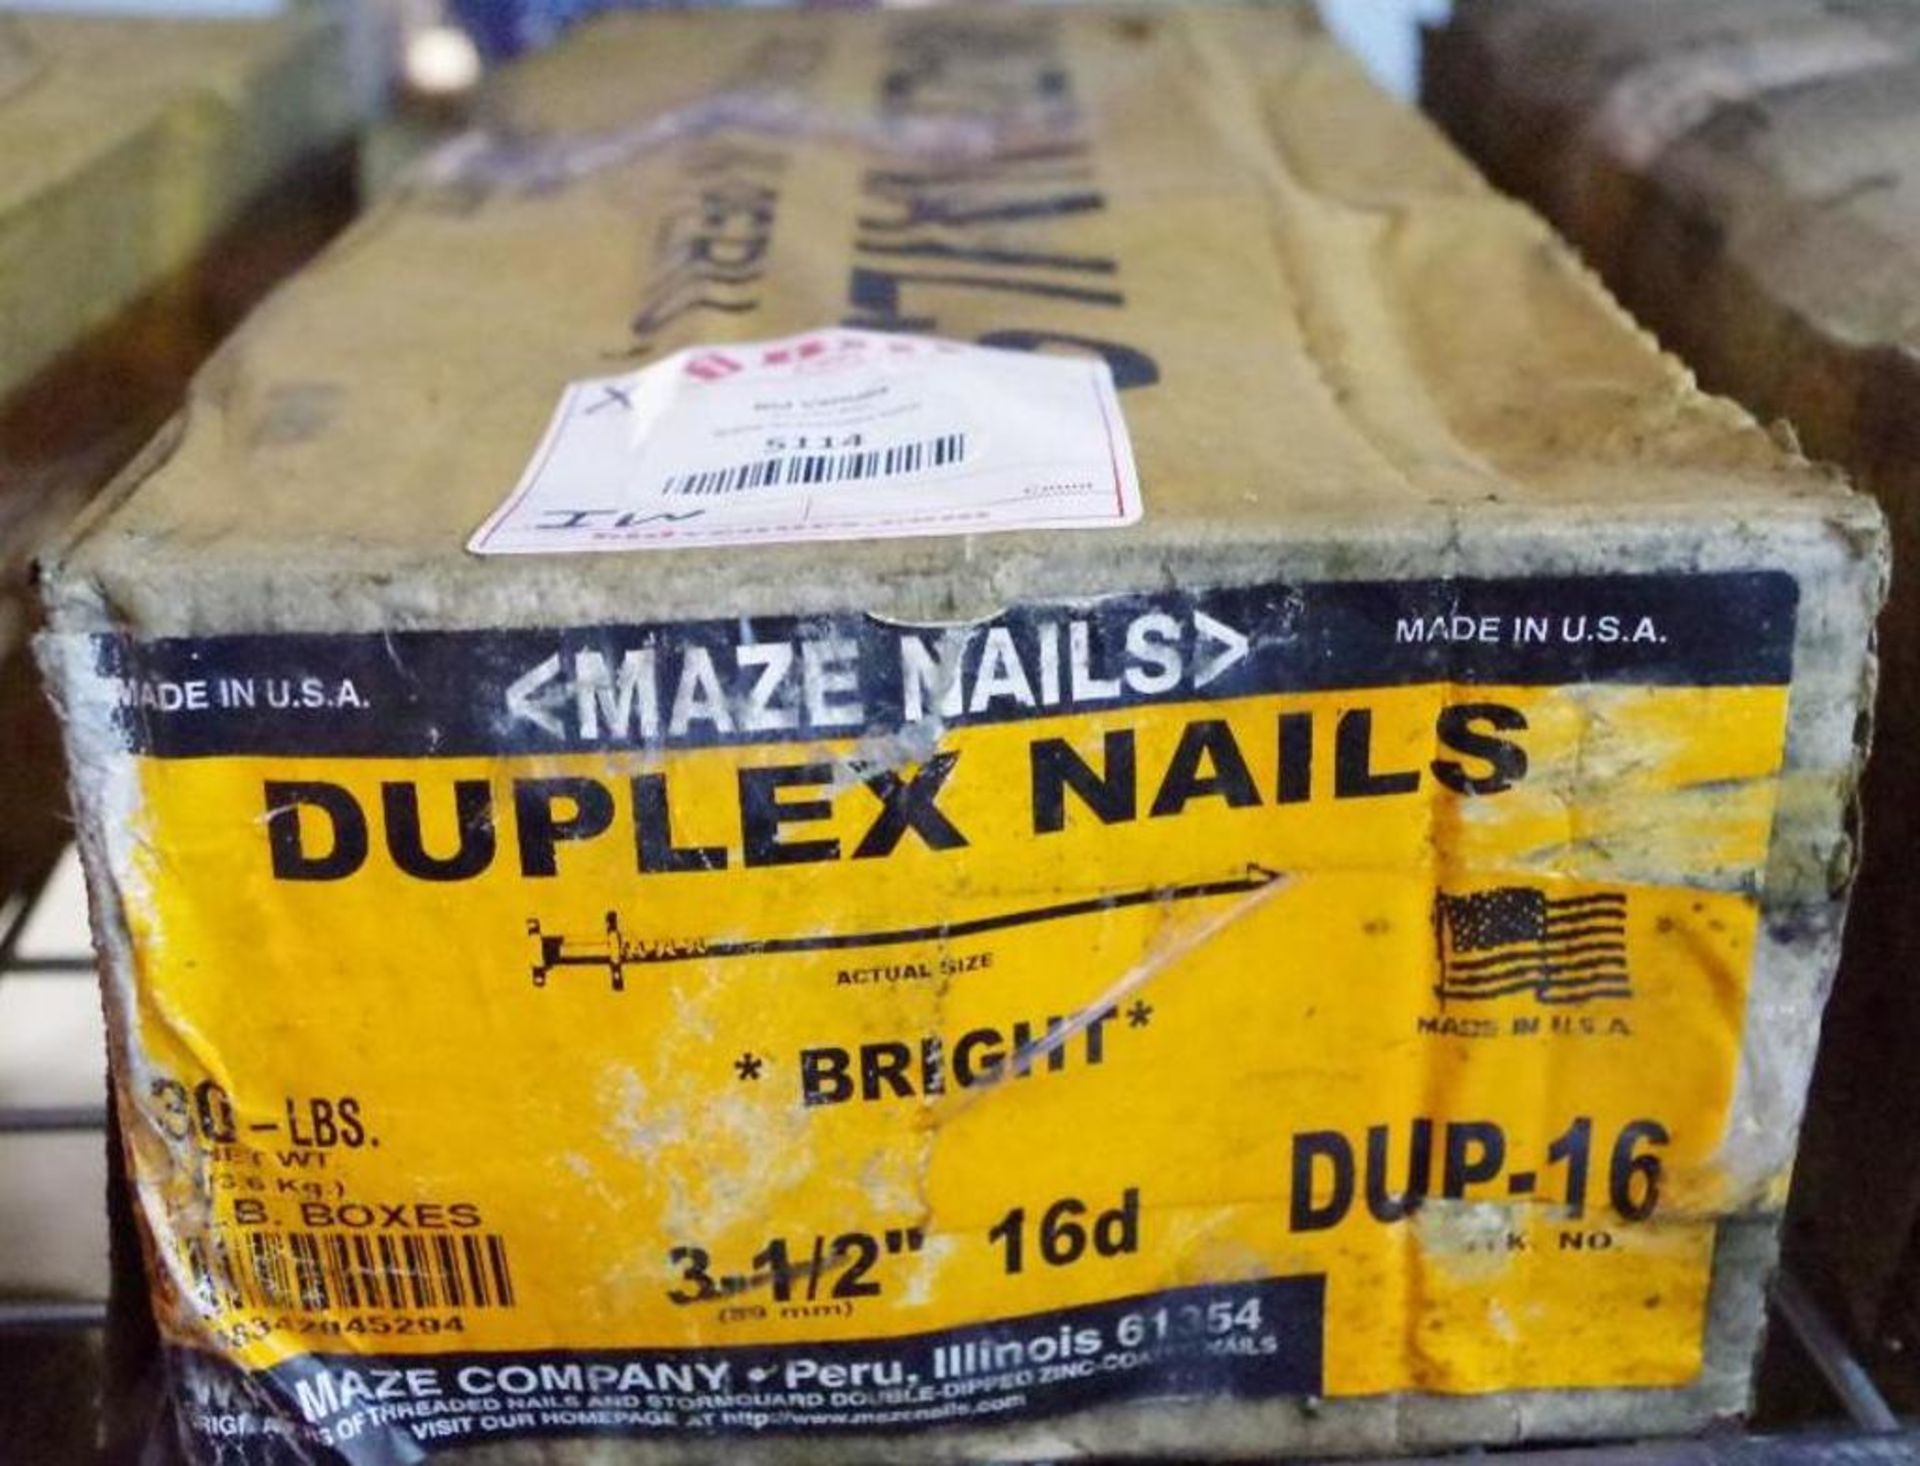 [30] Lbs MAZE Duplex Nails, Bright, 3-1/2", 16d M/N DUP-16 (6 Boxes of 5 Lbs) - Image 2 of 3